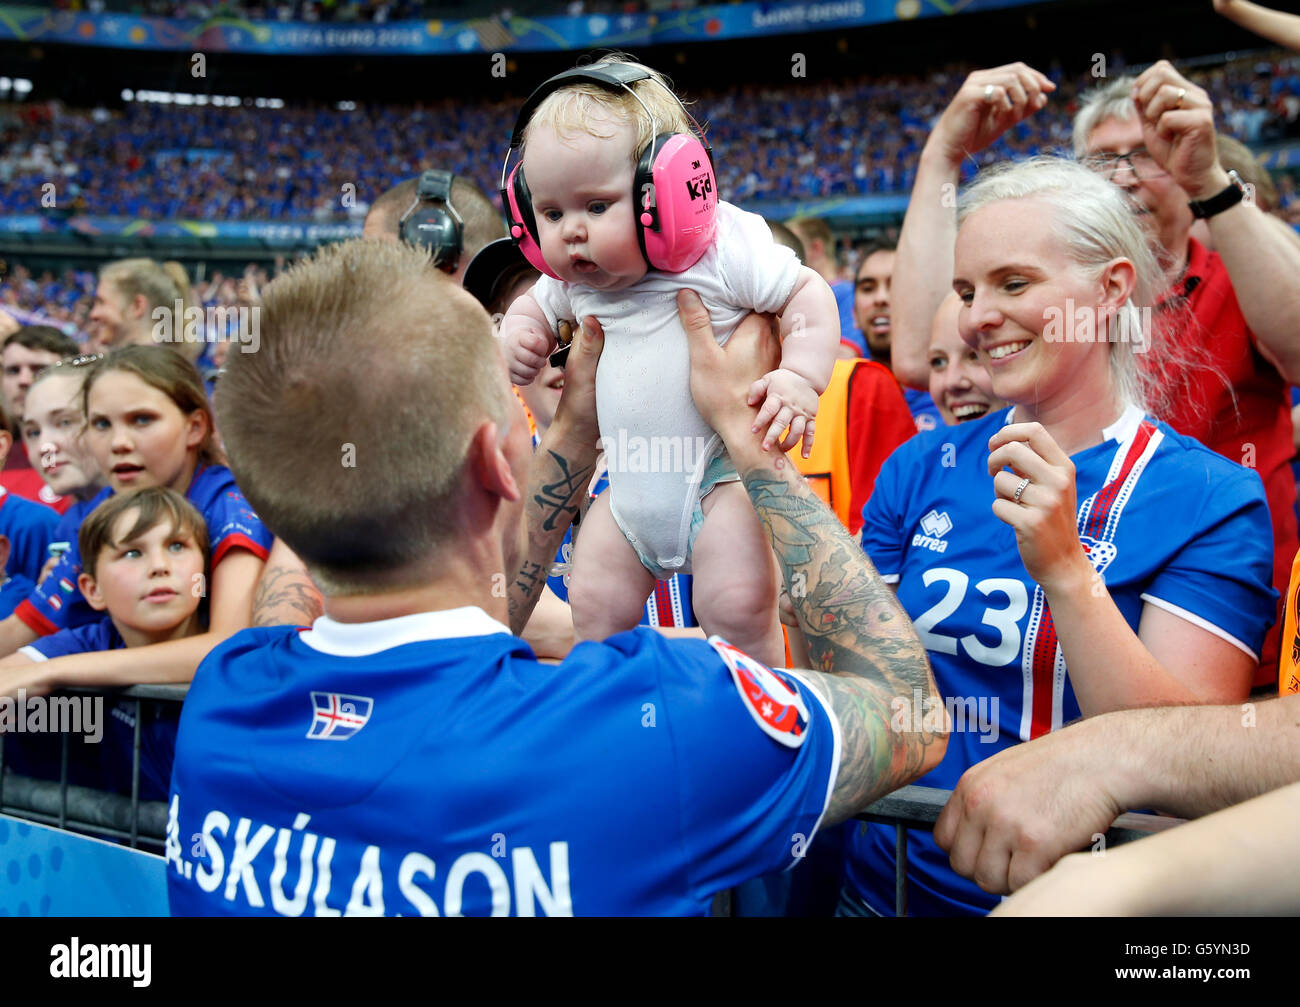 Iceland's Ari Freyr Skulason is handed a baby from the crowd as he celebrates qualifying for the last 16 round after the Euro 2016, Group F match at the Stade de France, Paris. after qualifying for the last 16 round after the Euro 2016, Group F match at the Stade de France, Paris. PRESS ASSOCIATION Photo. Picture date: Wednesday June 22, 2016. See PA story SOCCER Iceland. Photo credit should read: Owen Humphreys/PA Wire. Stock Photo